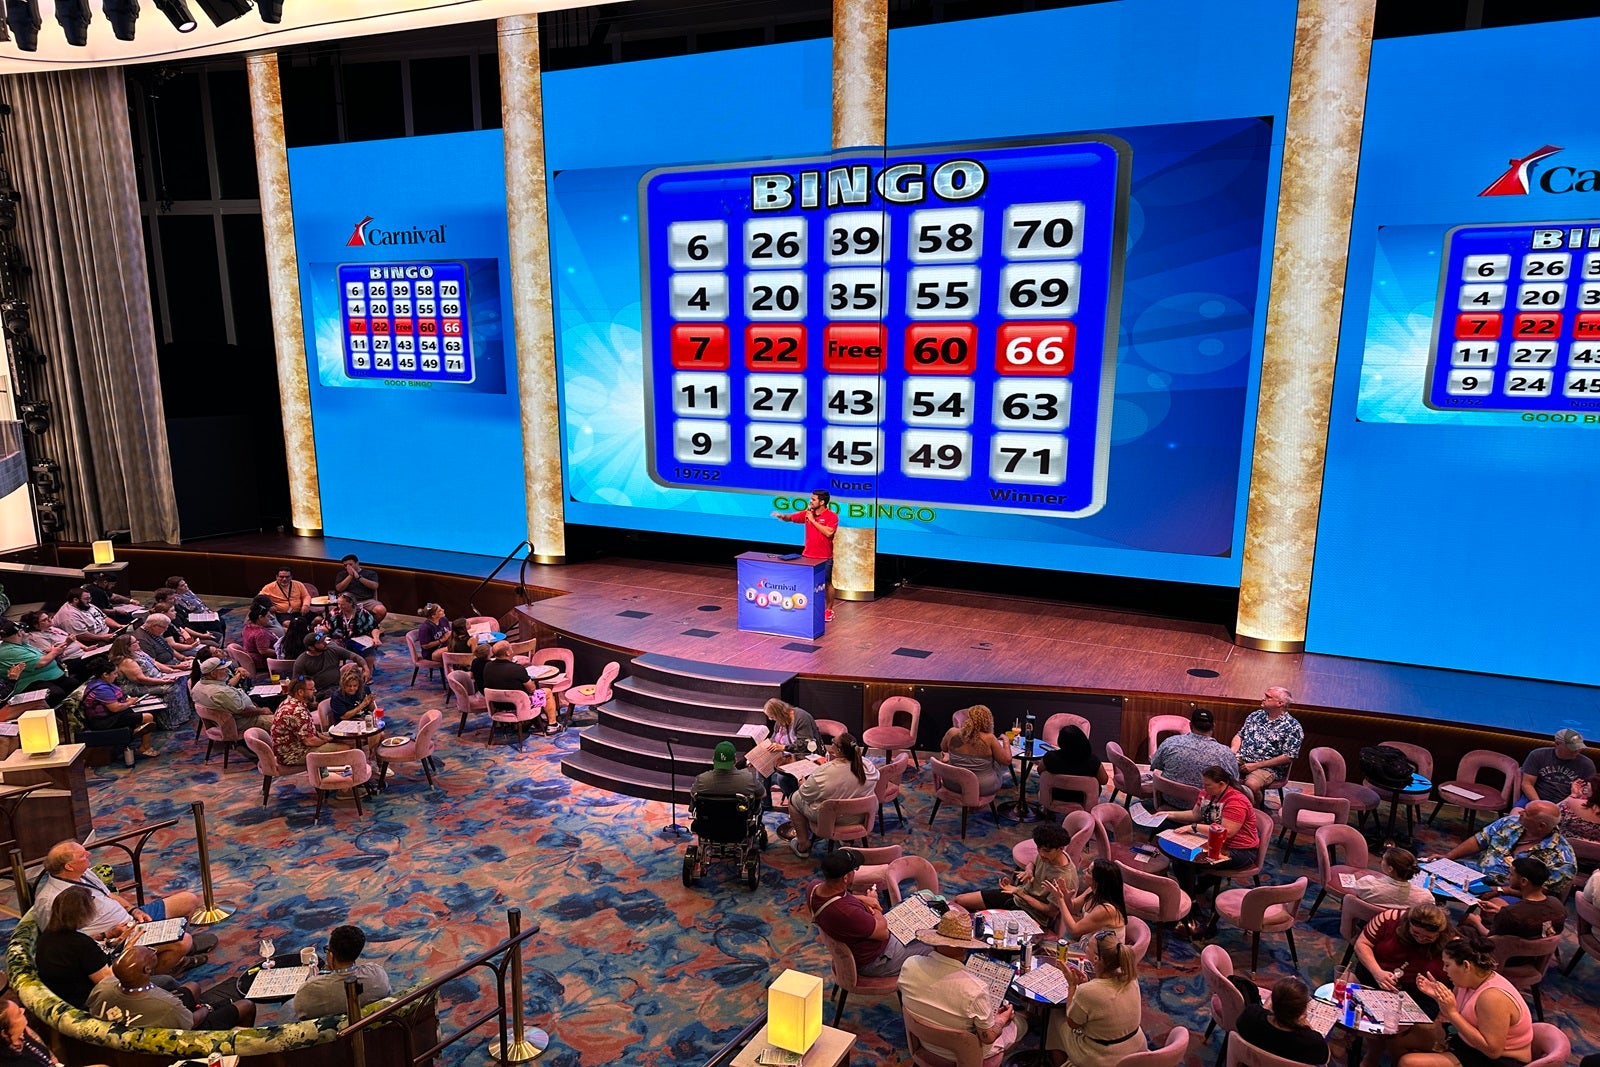 Cruise passengers playing bingo with the numbers displayed on a giant LED screen